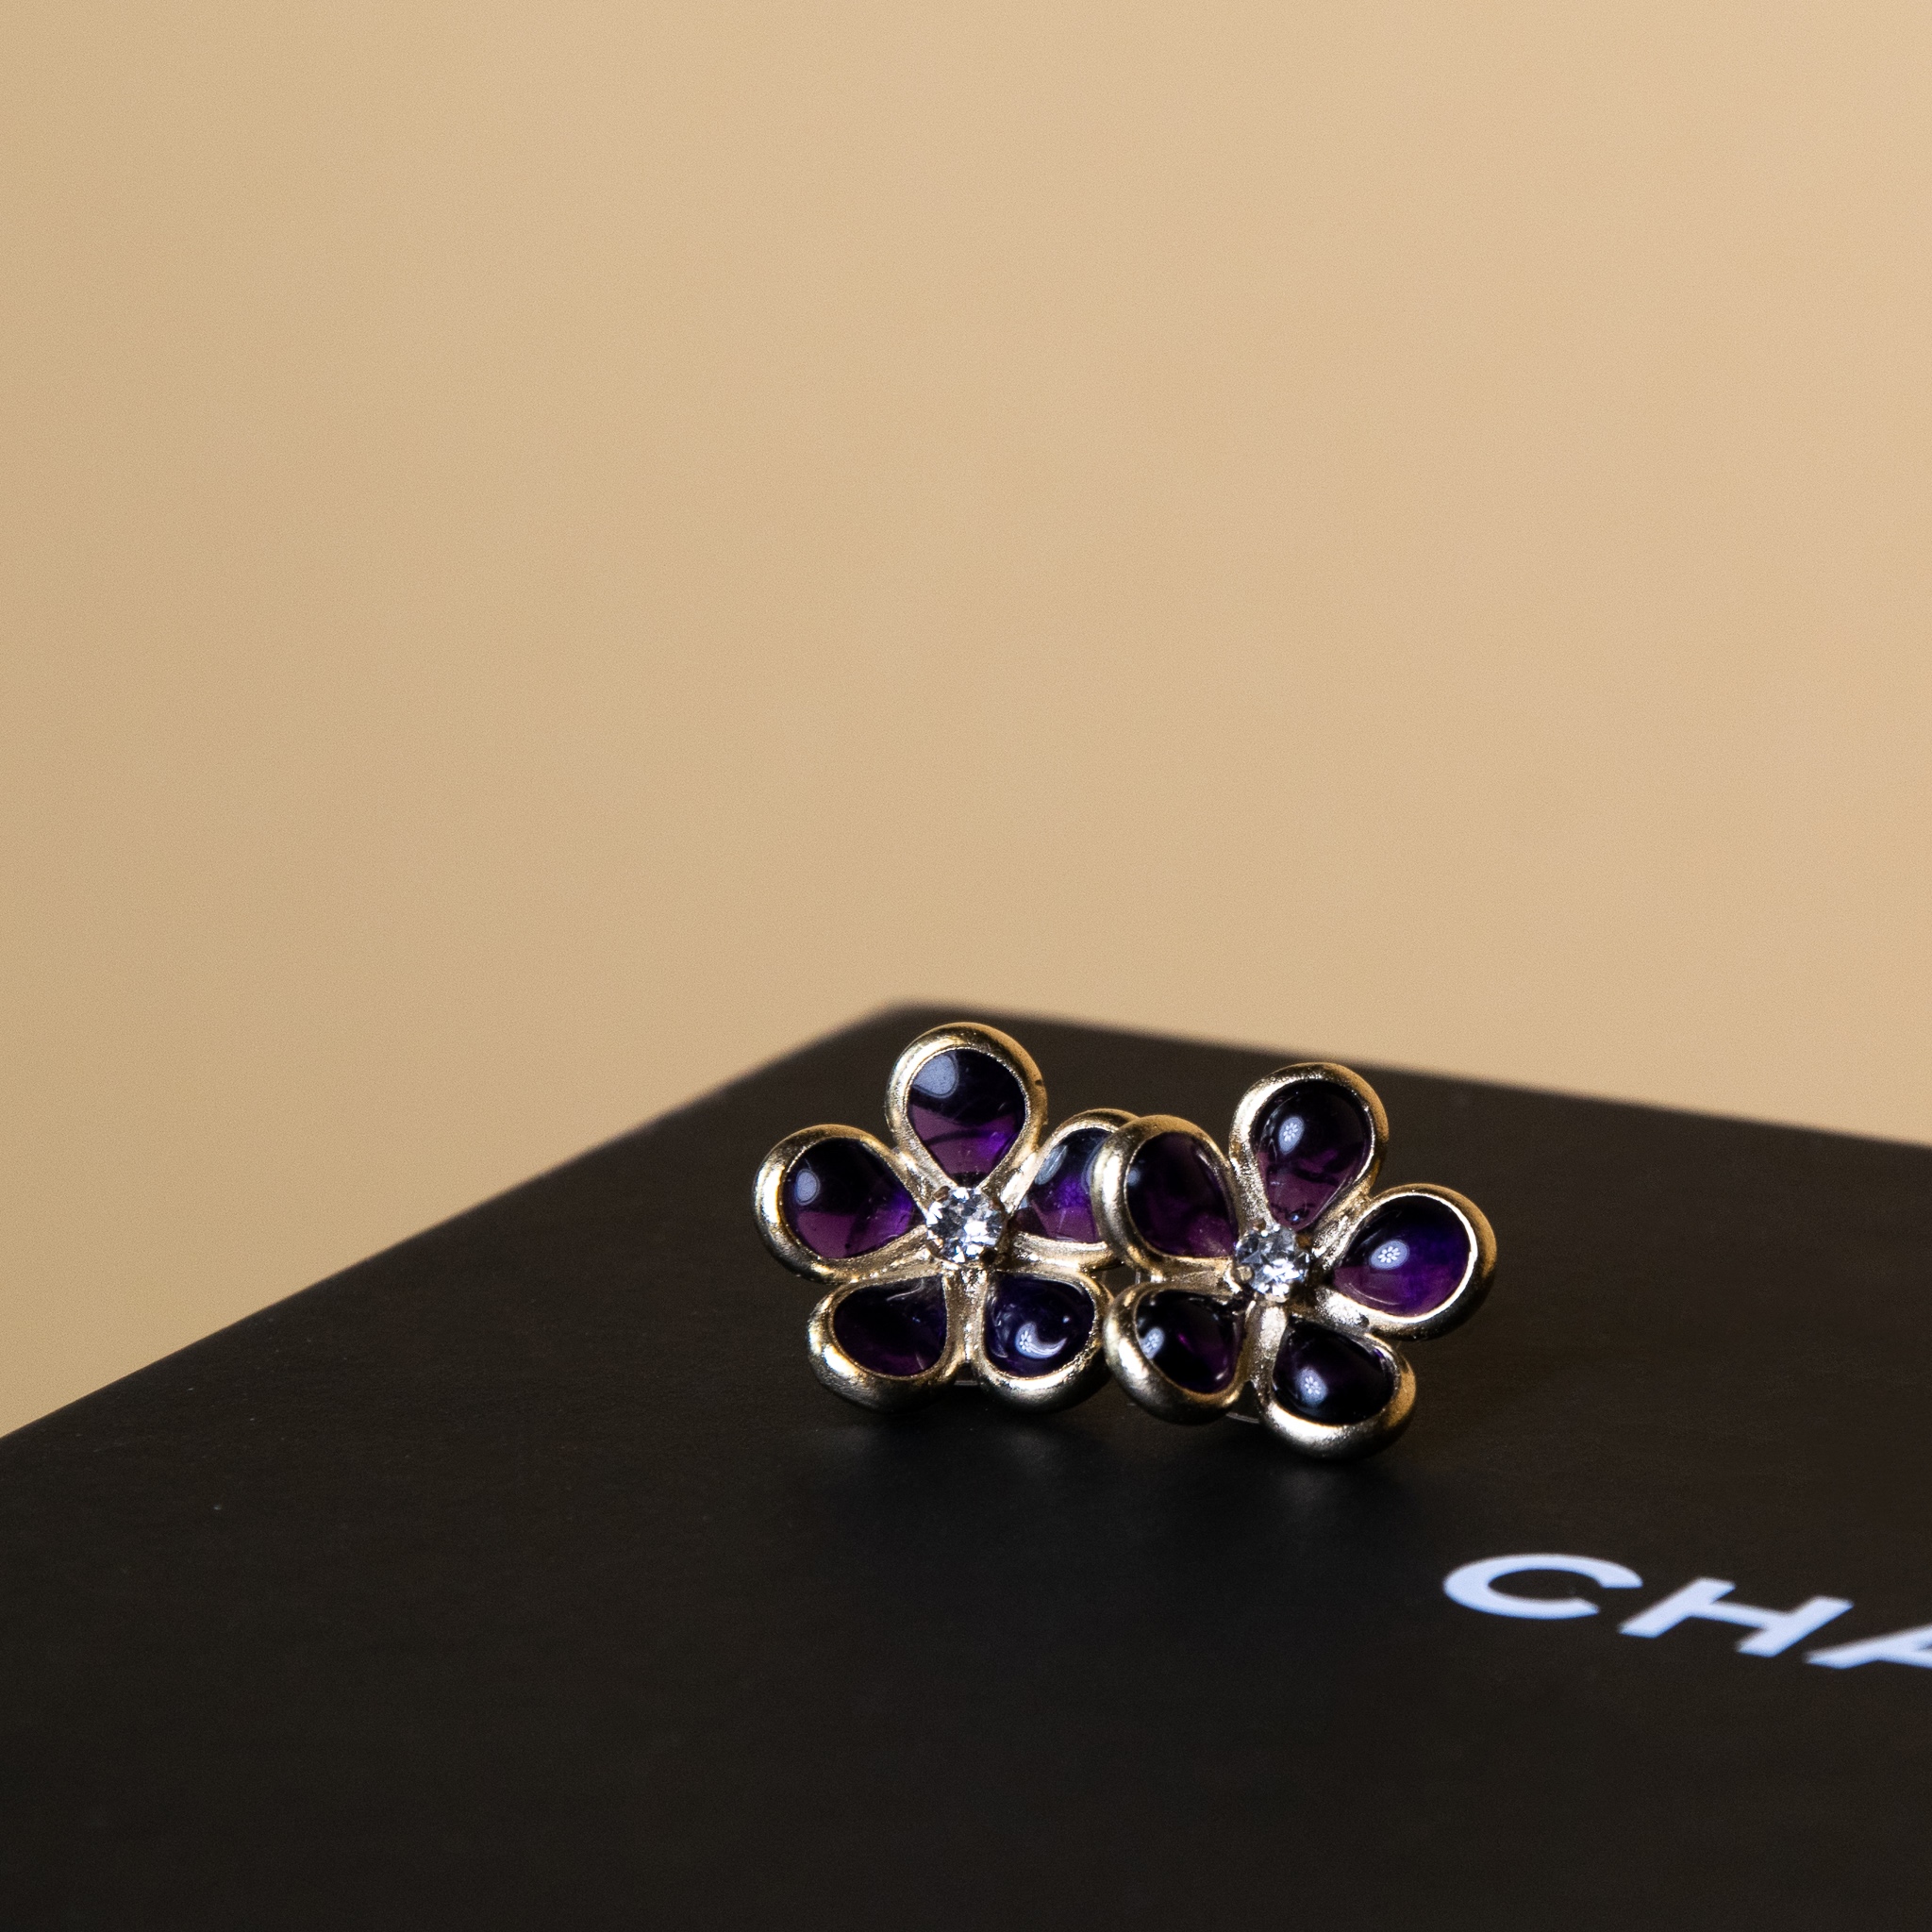 Chanel Vintage Stud Earrings with Flowers and Crystal 2002